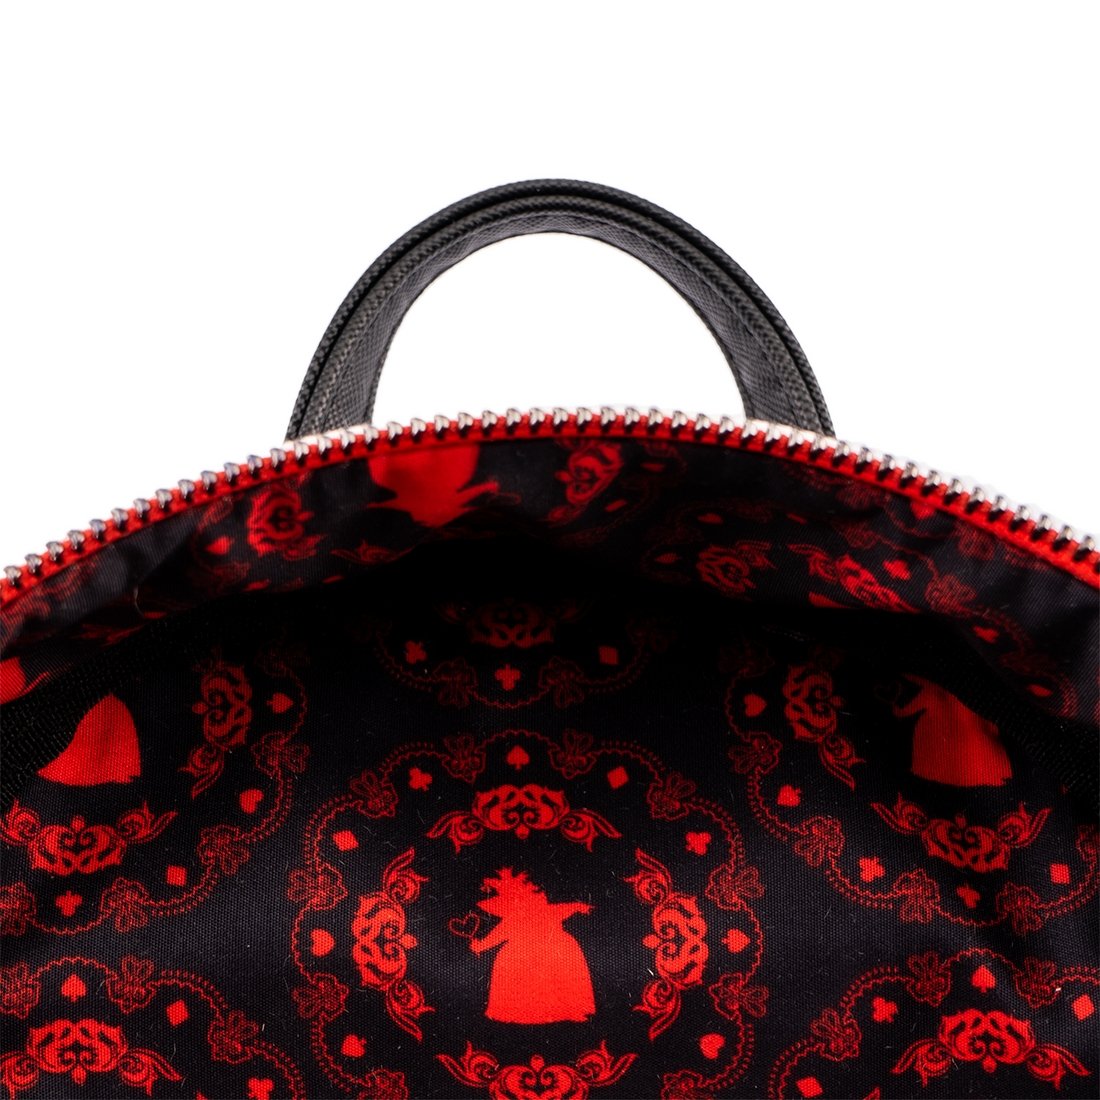 Villains Scene Series; Queen of Hearts Mini Backpack - Rockamilly-Bags & Purses-Vintage